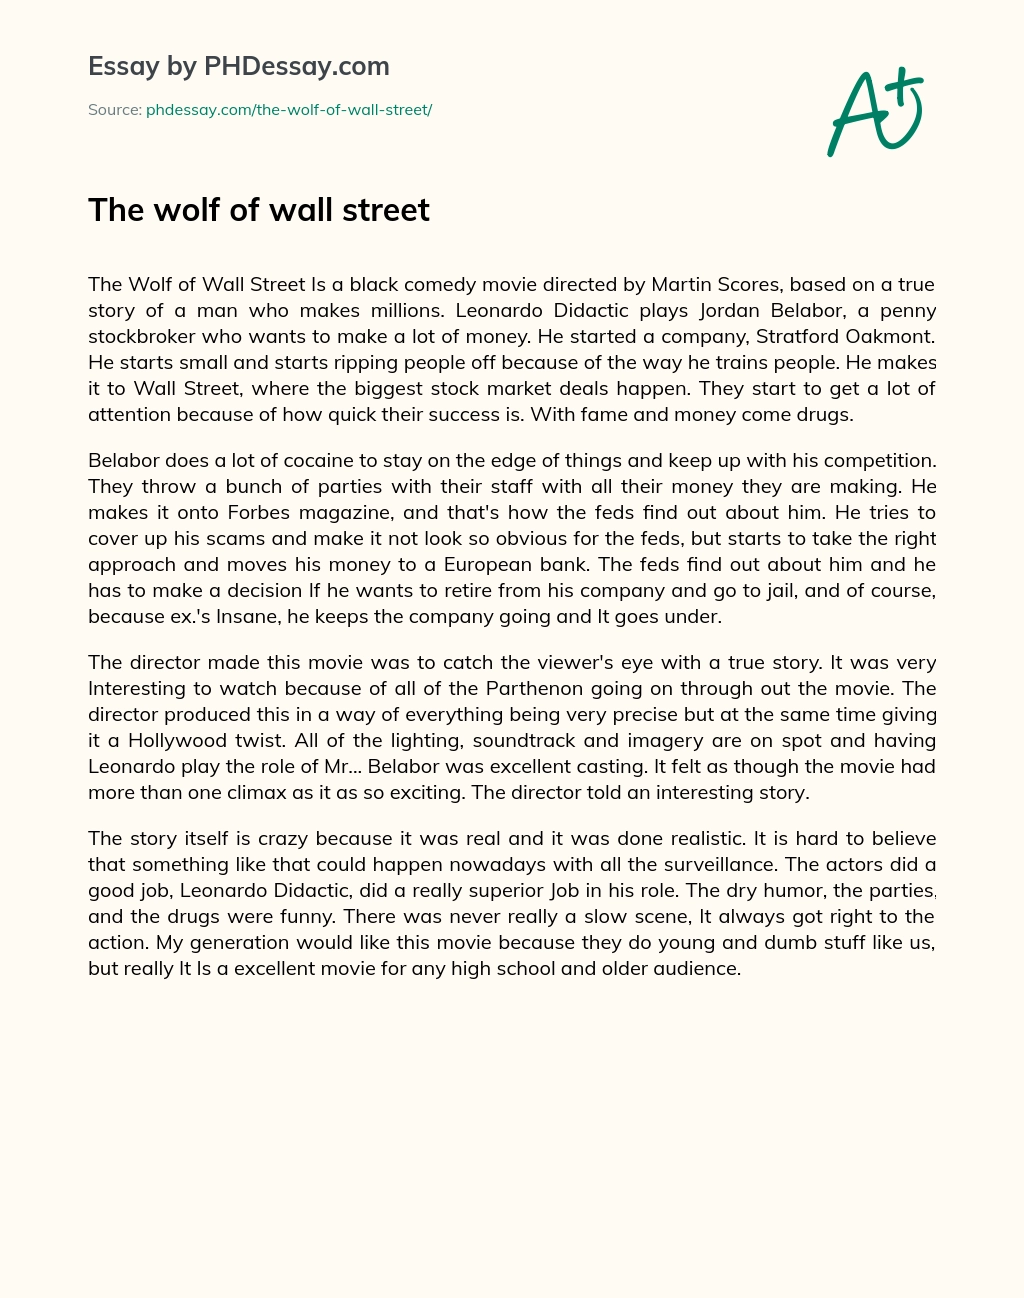 The wolf of wall street essay